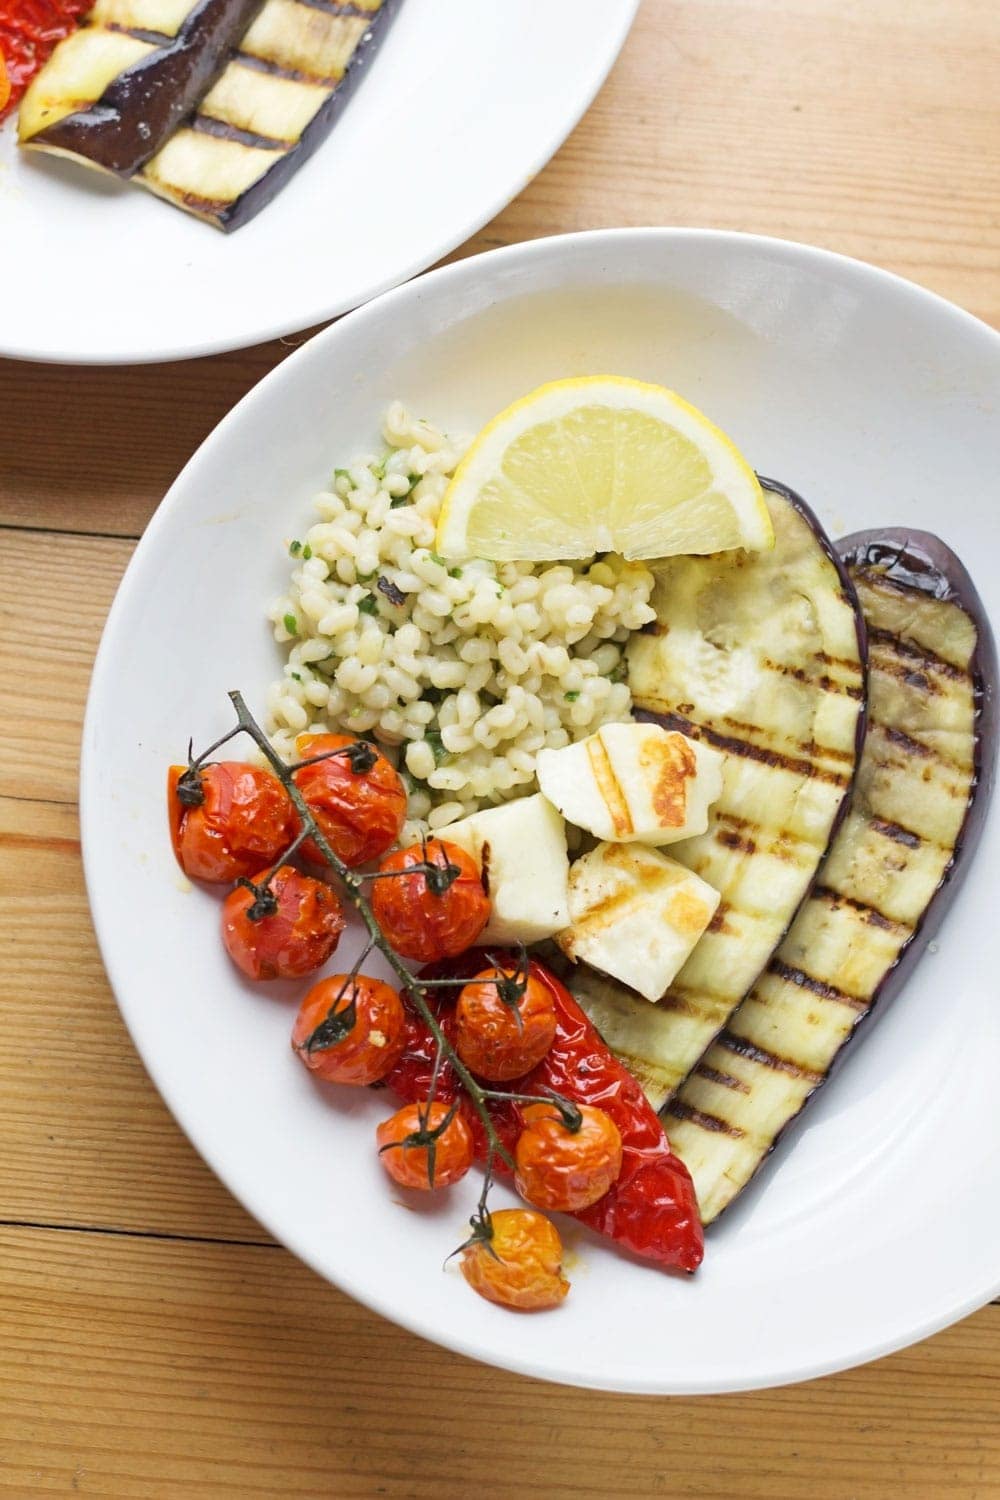 Summer dinner is here with this griddled halloumi served over herby pearl barley. Roasted veg helps to make this a really healthy and delicious meal.